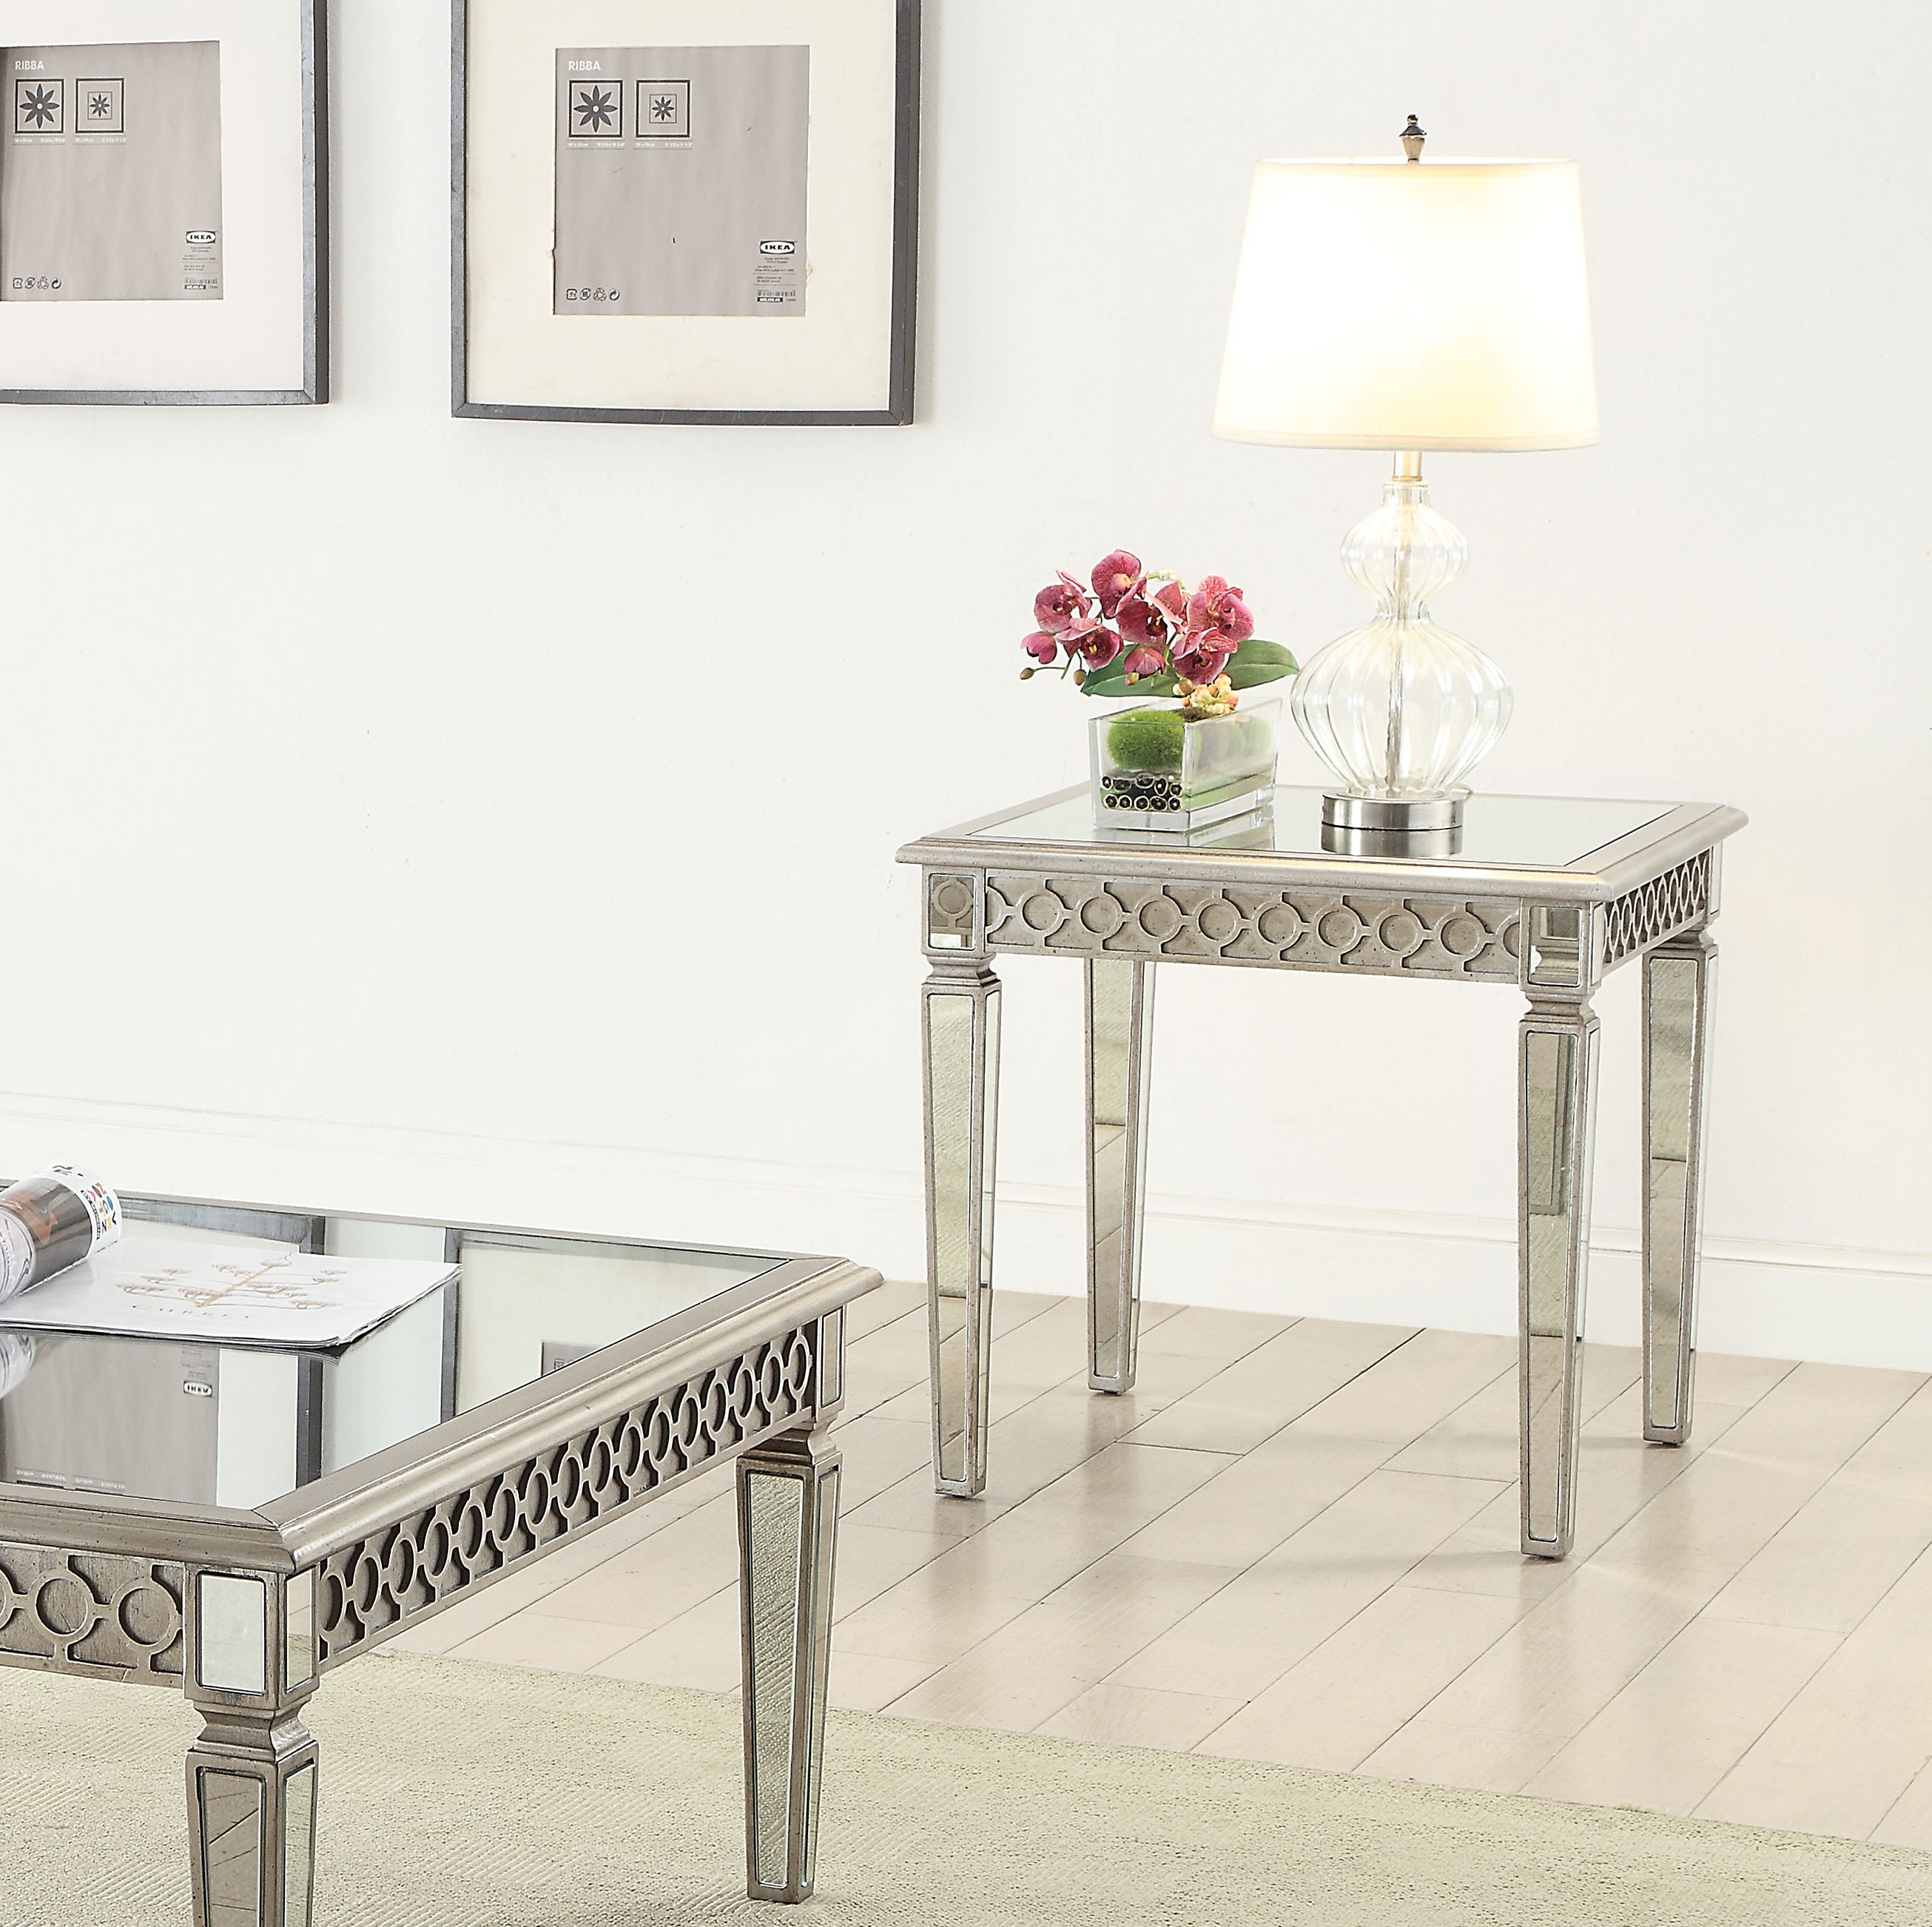 Acme Kacela Square Mirrored End Table in Champagne - image 2 of 2